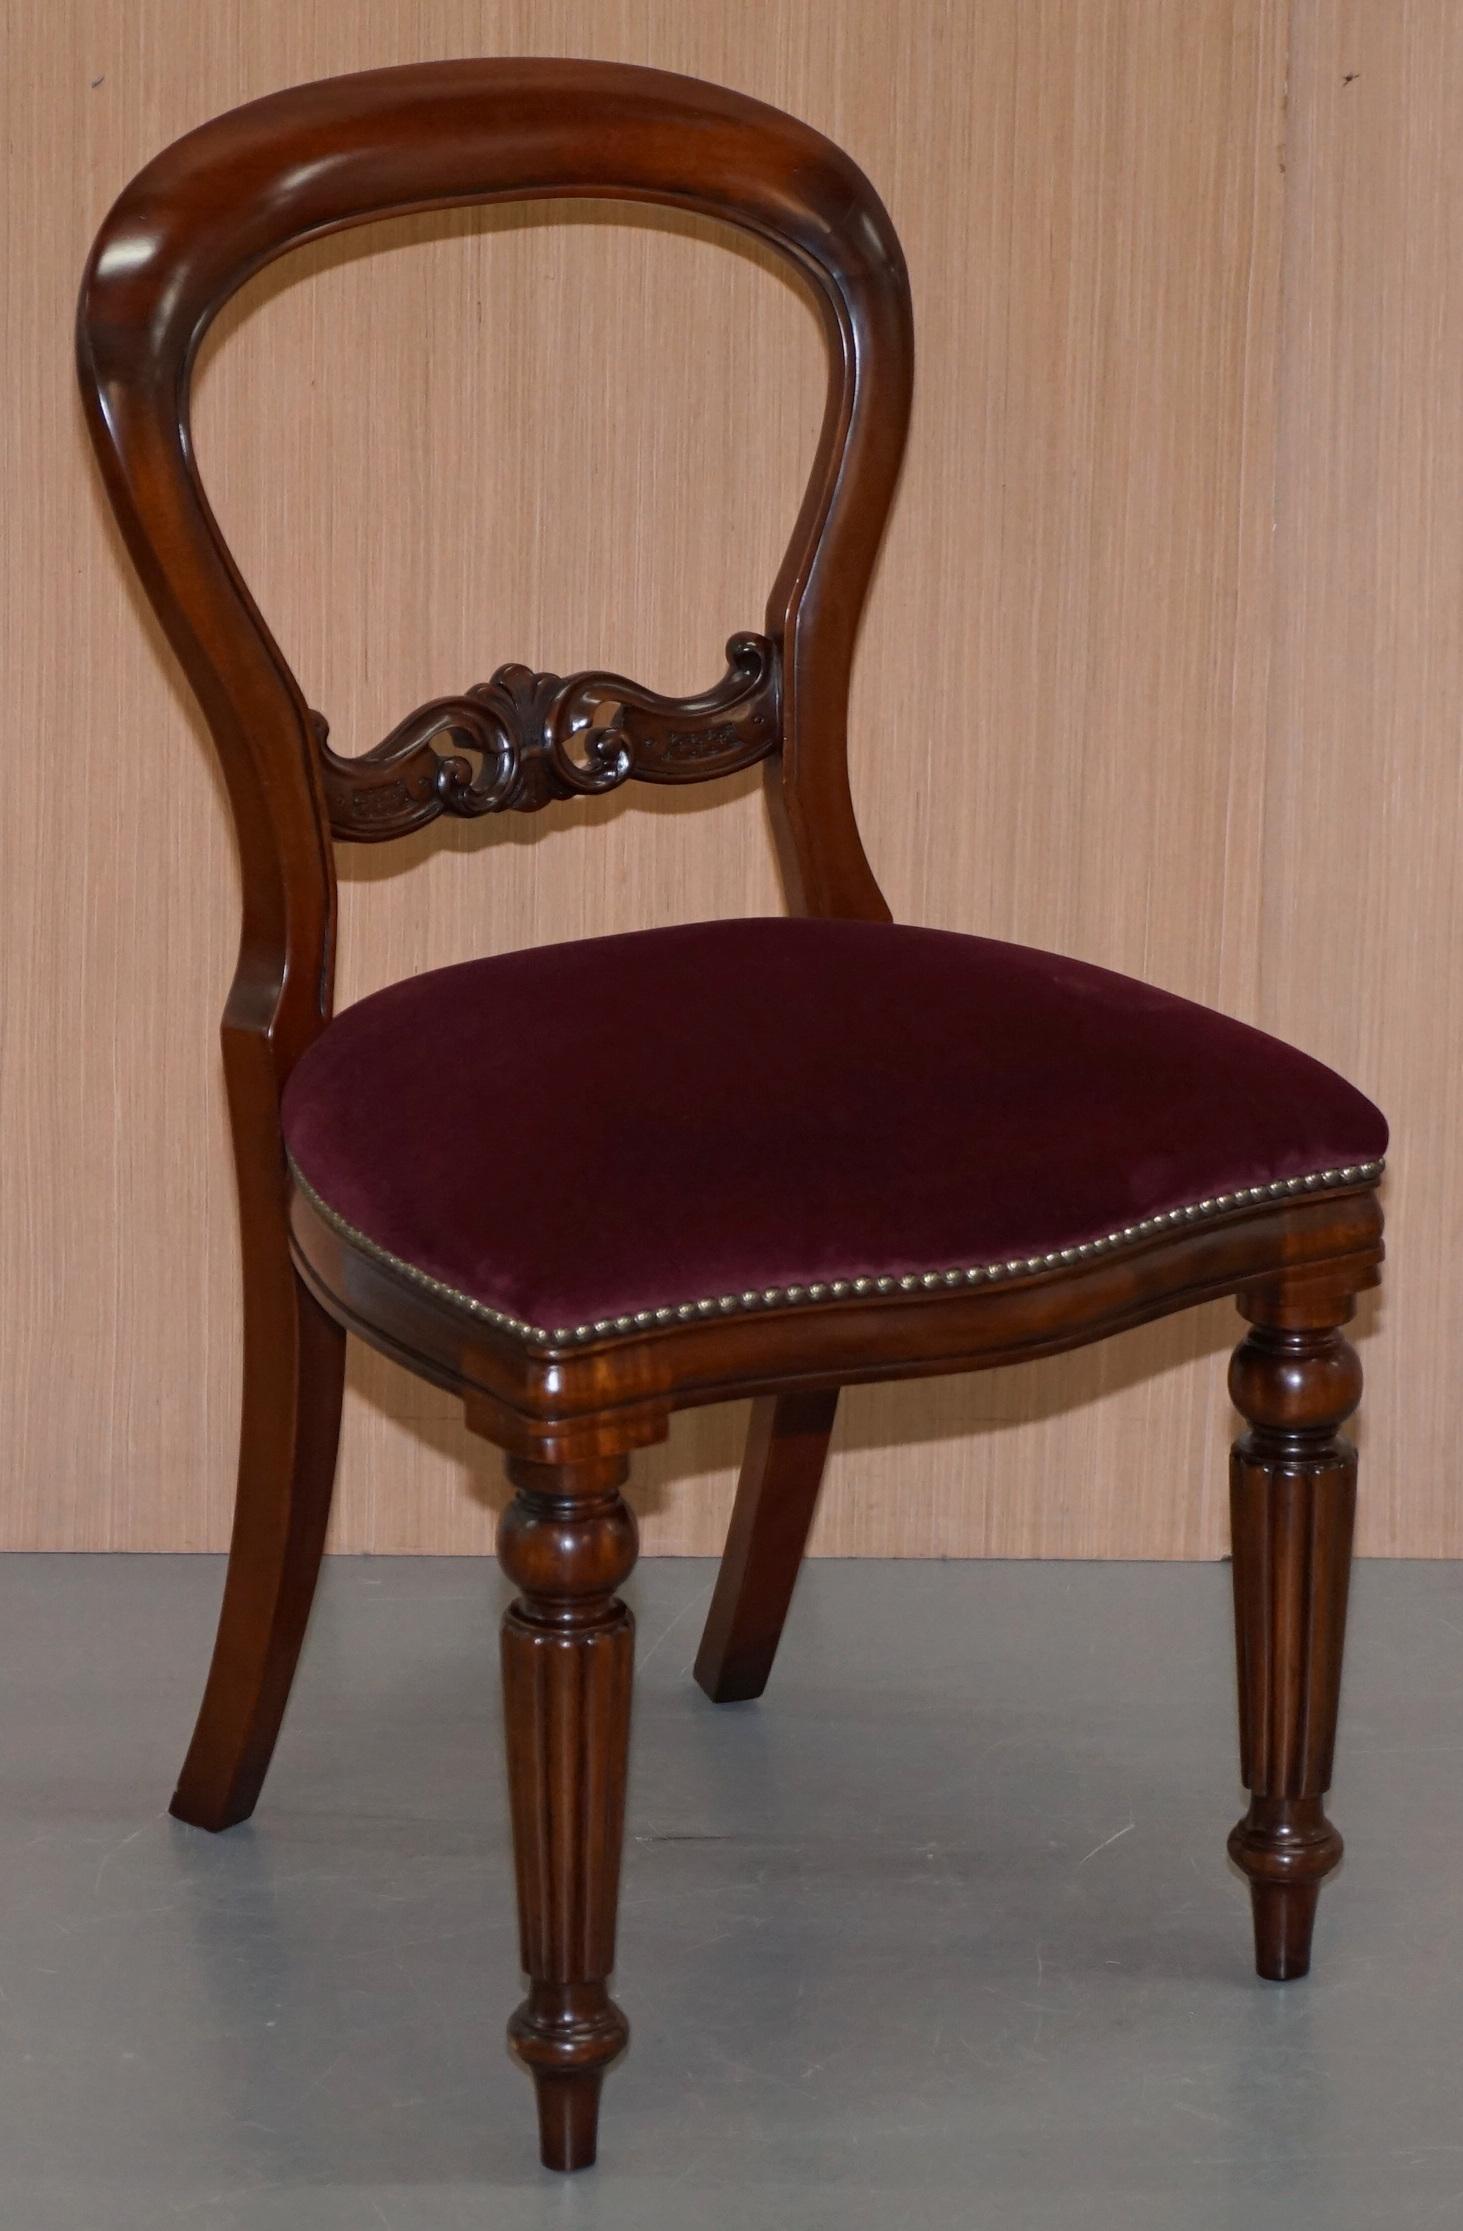 We are delighted to offer for sale this pair of stunning Mahogany and Rijoa velour dining chairs made by the wonder that was Frank Hudson & Son’s for Harrods London

An absolutely sublime quality pair of chairs, each one stamped to the base with